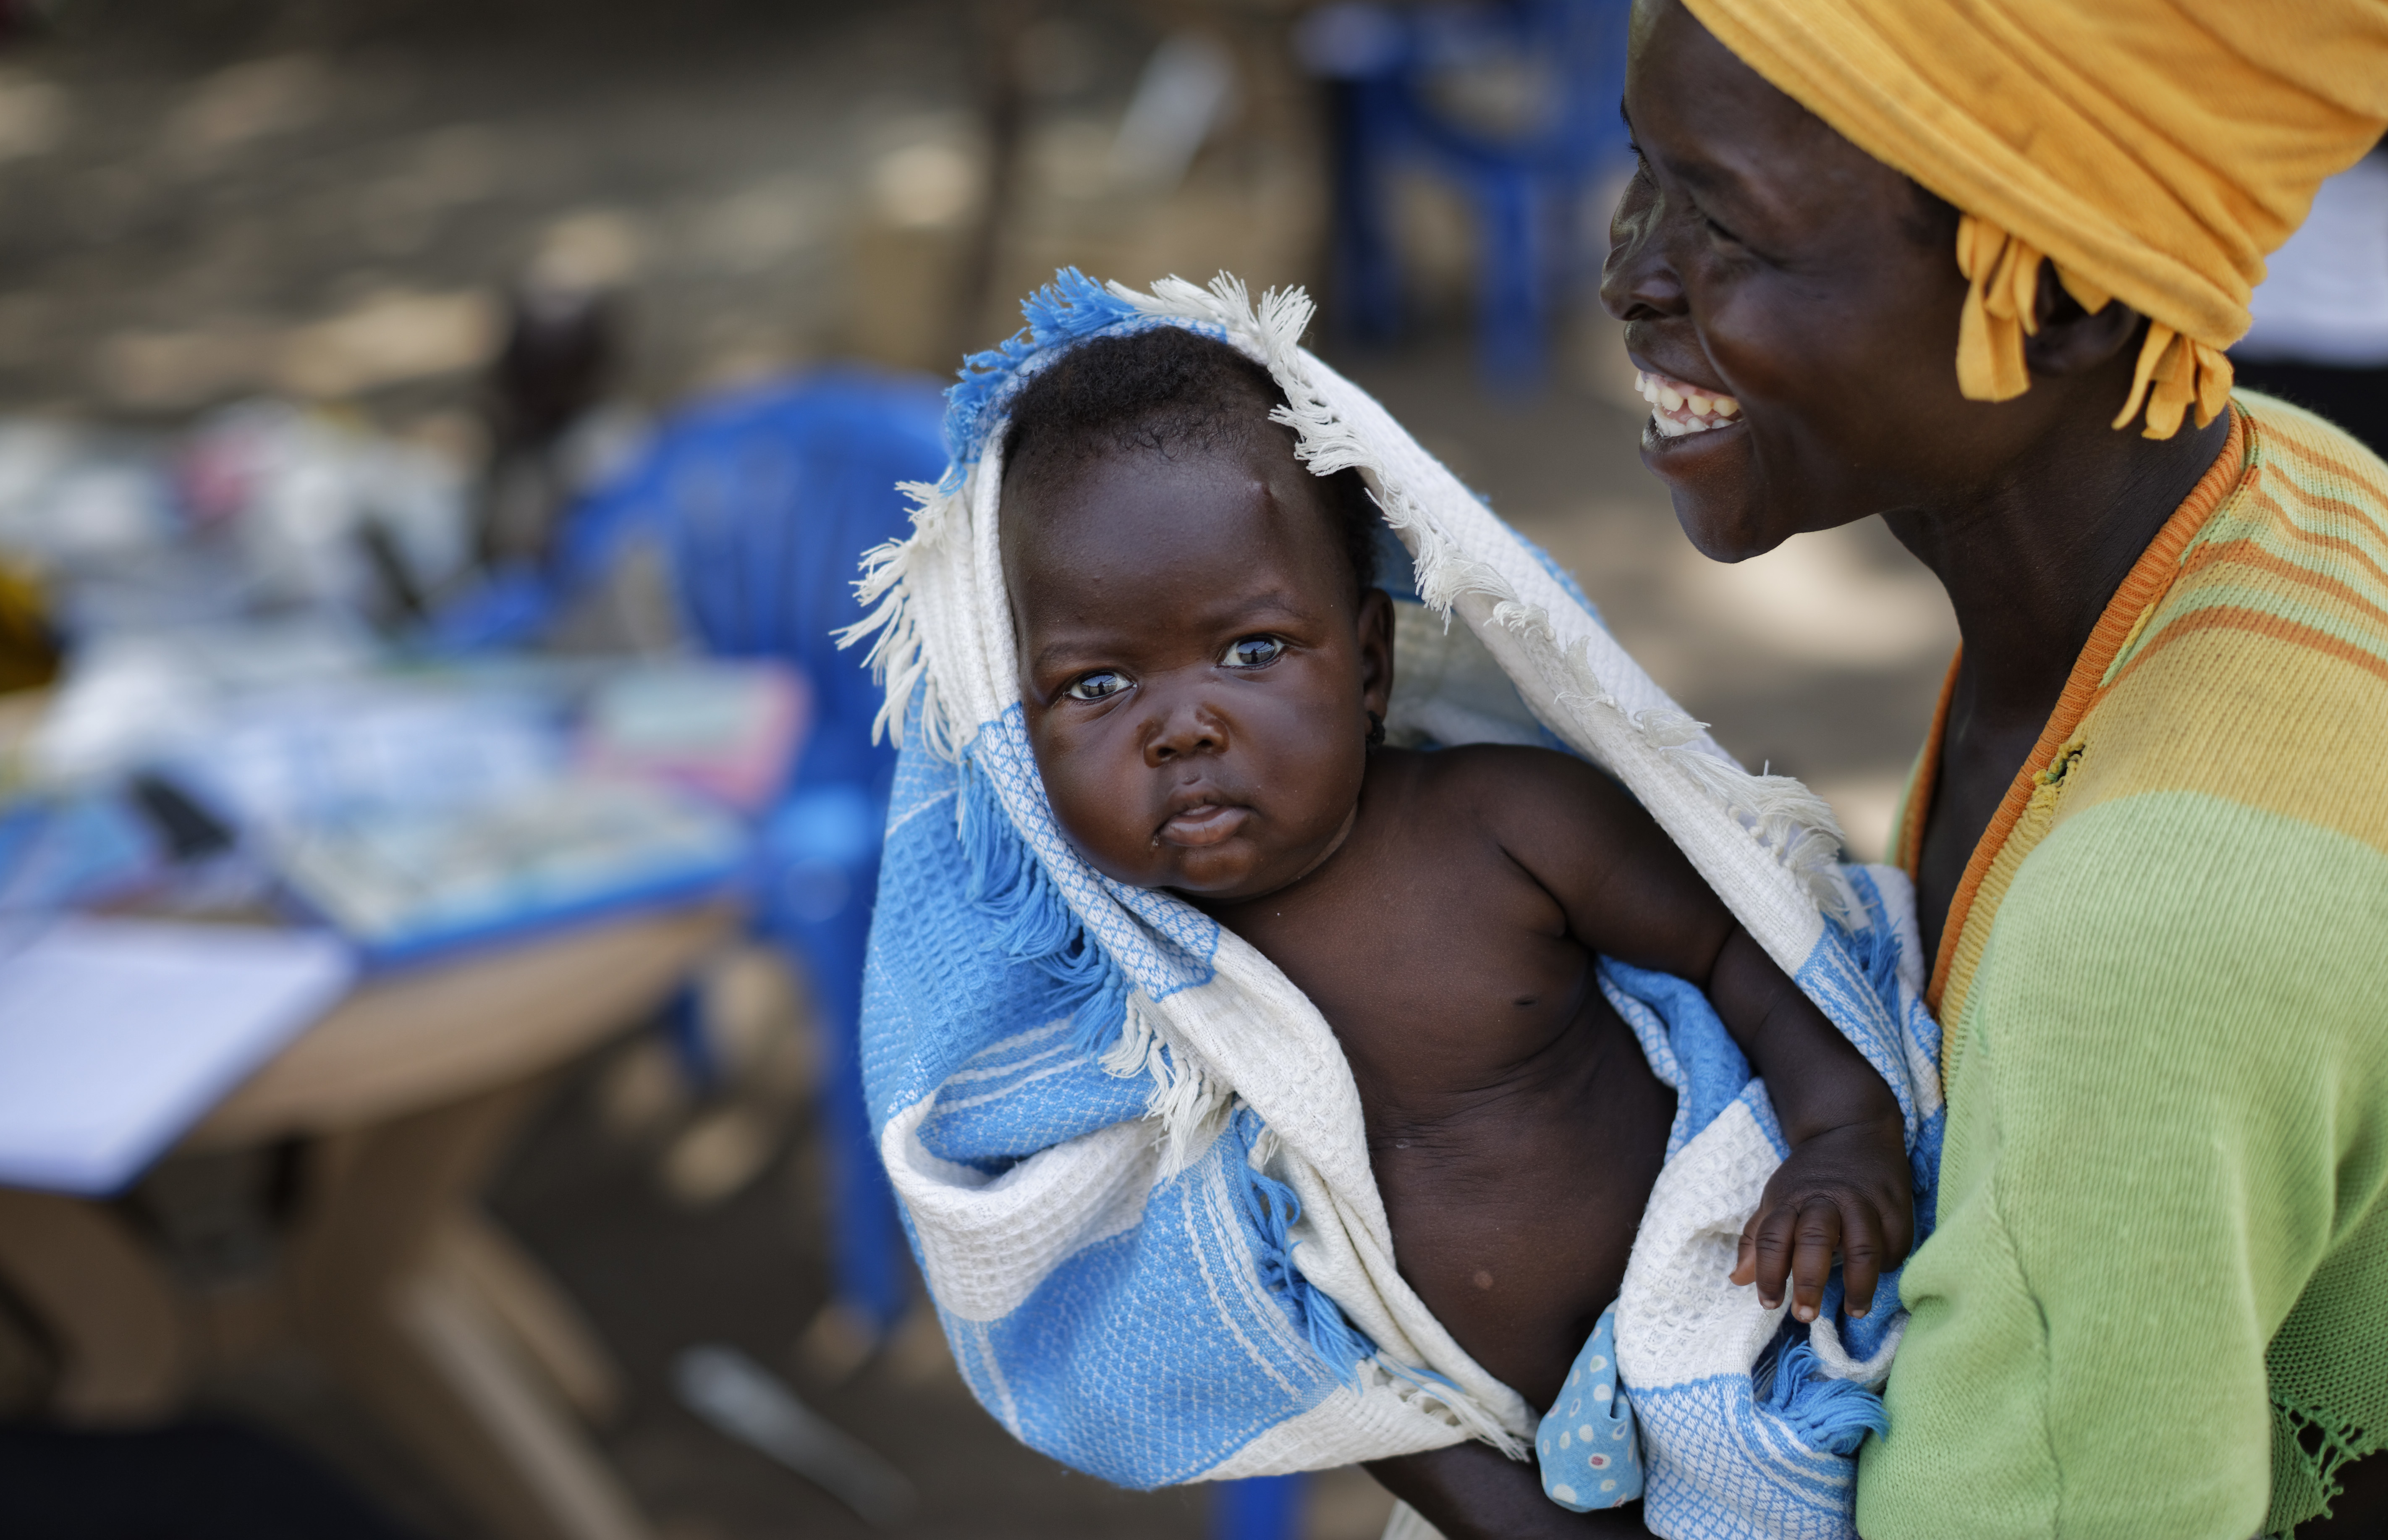 South Sudanese refugee Betty Sakala, from Central Equatoria state, laughs after being shown a photo of her daughter Mary, 2 months, as she waits to have Mary examined at a mobile health clinic run by the International Rescue Committee, in Bidi Bidi, Uganda, Monday, June 5, 2017. Bidi Bidi is a sprawling complex of mud-brick houses that is now the world's largest refugee settlement holding some of those who fled the civil war in South Sudan, which has killed tens of thousands and driven out more than 1.5 million people in the past three years, creating the world's largest refugee crisis. (AP Photo/Ben Curtis)